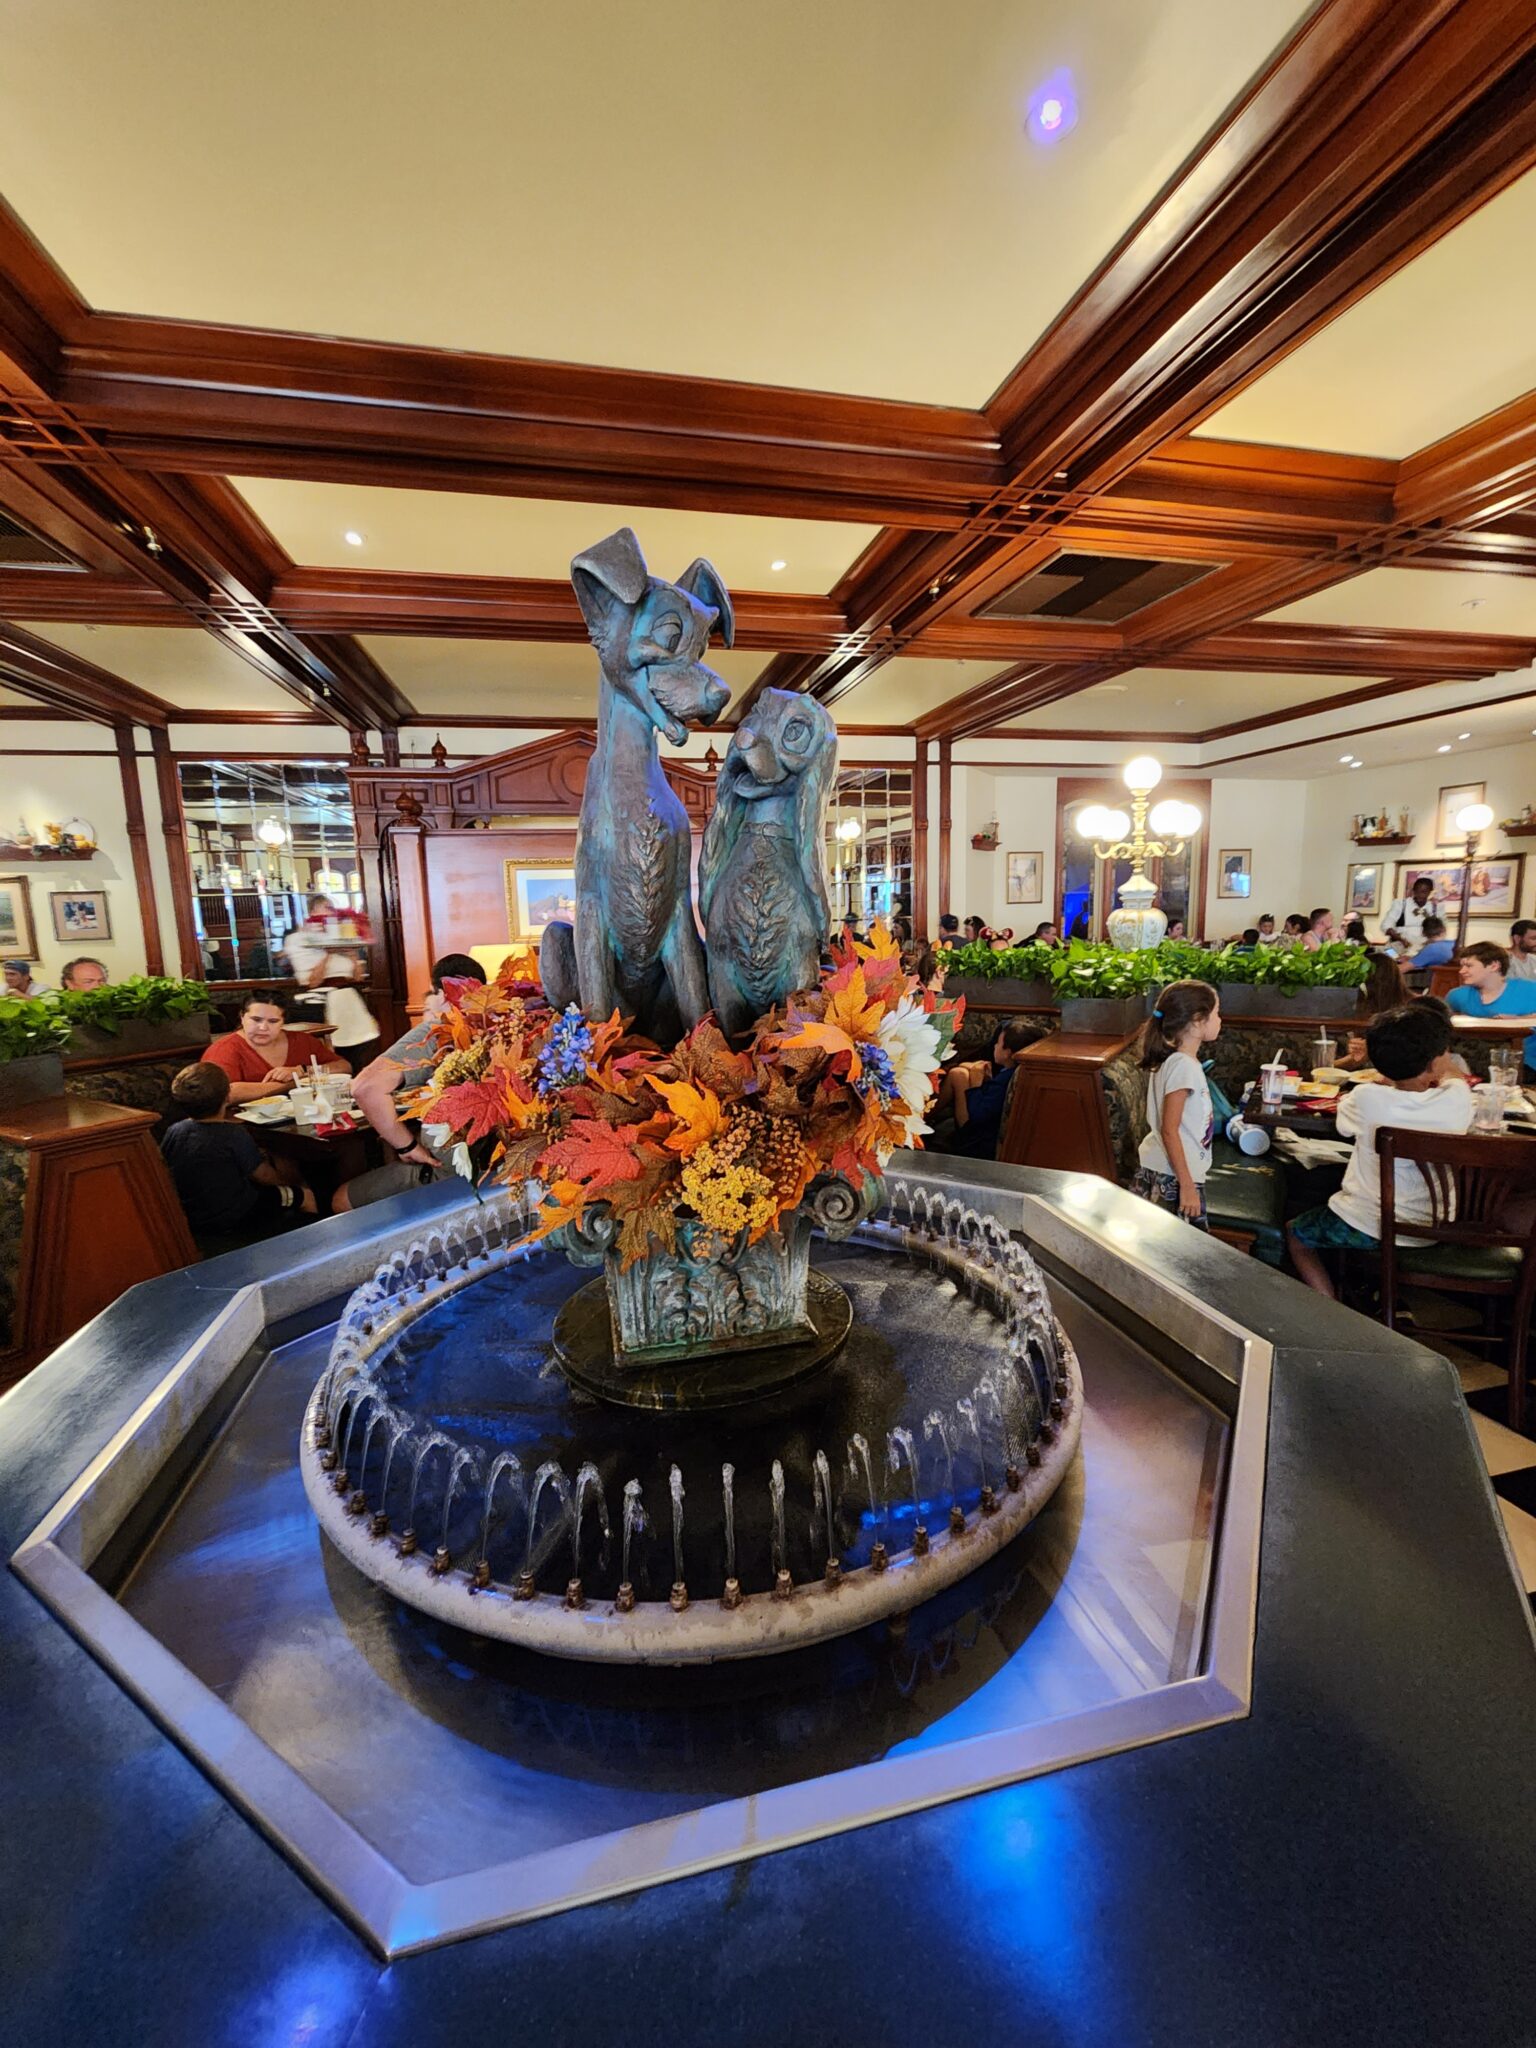 Tony's Town Square Restaurant - Table Service at MK